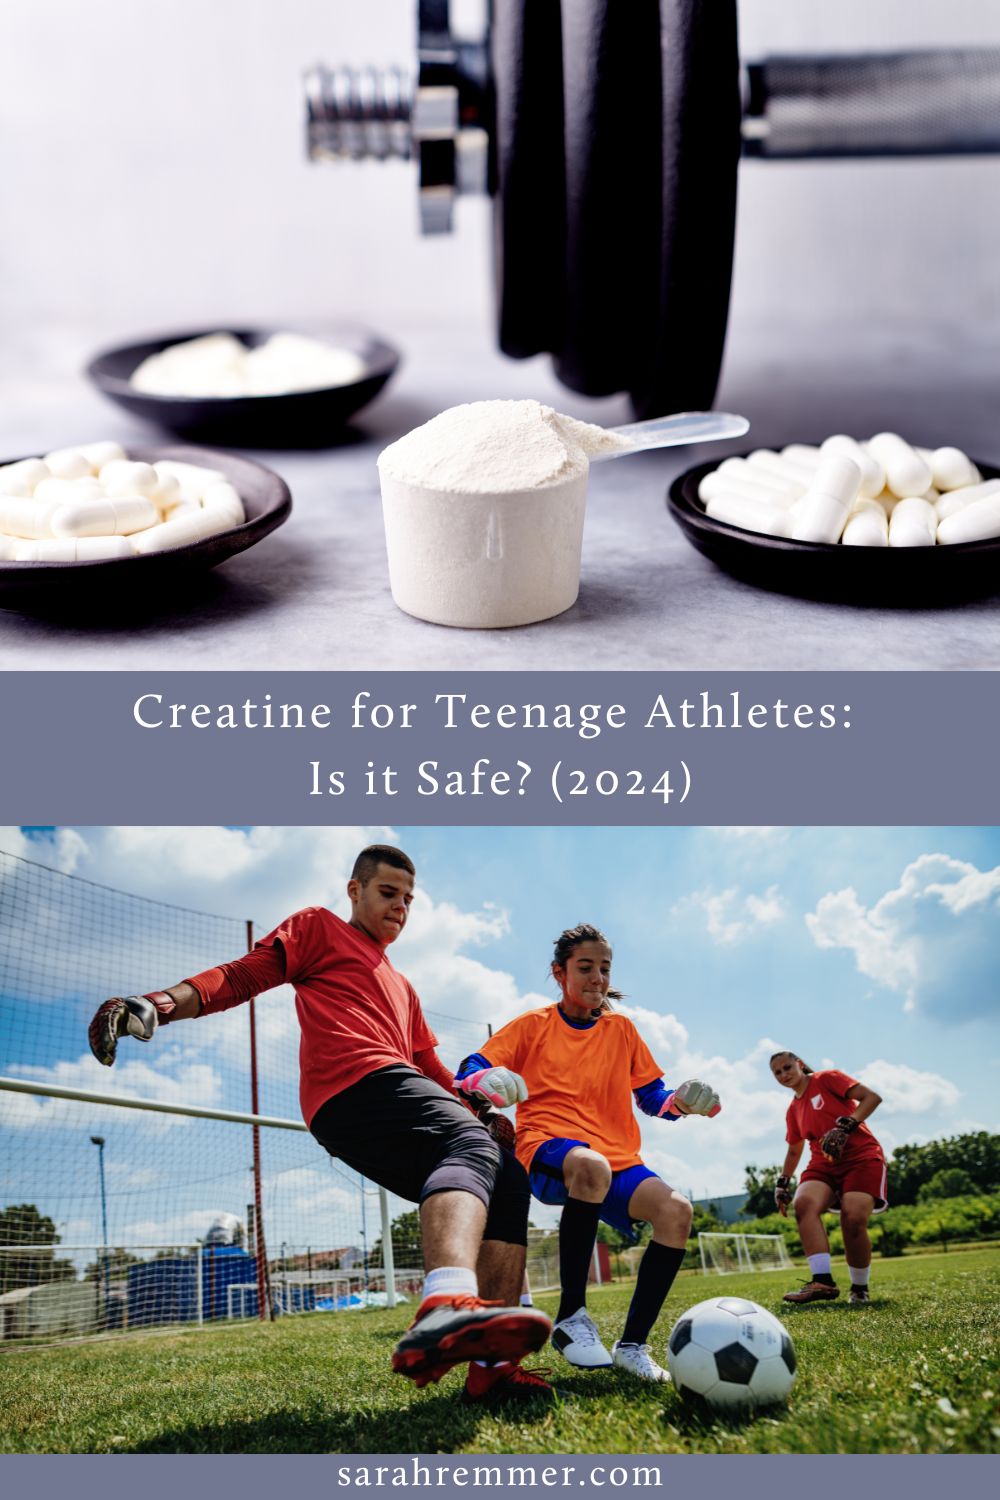 Is creatine safe for teens? As a dietitian and mom of a teenager, I dive into the evidence so you can approach this topic with confidence.